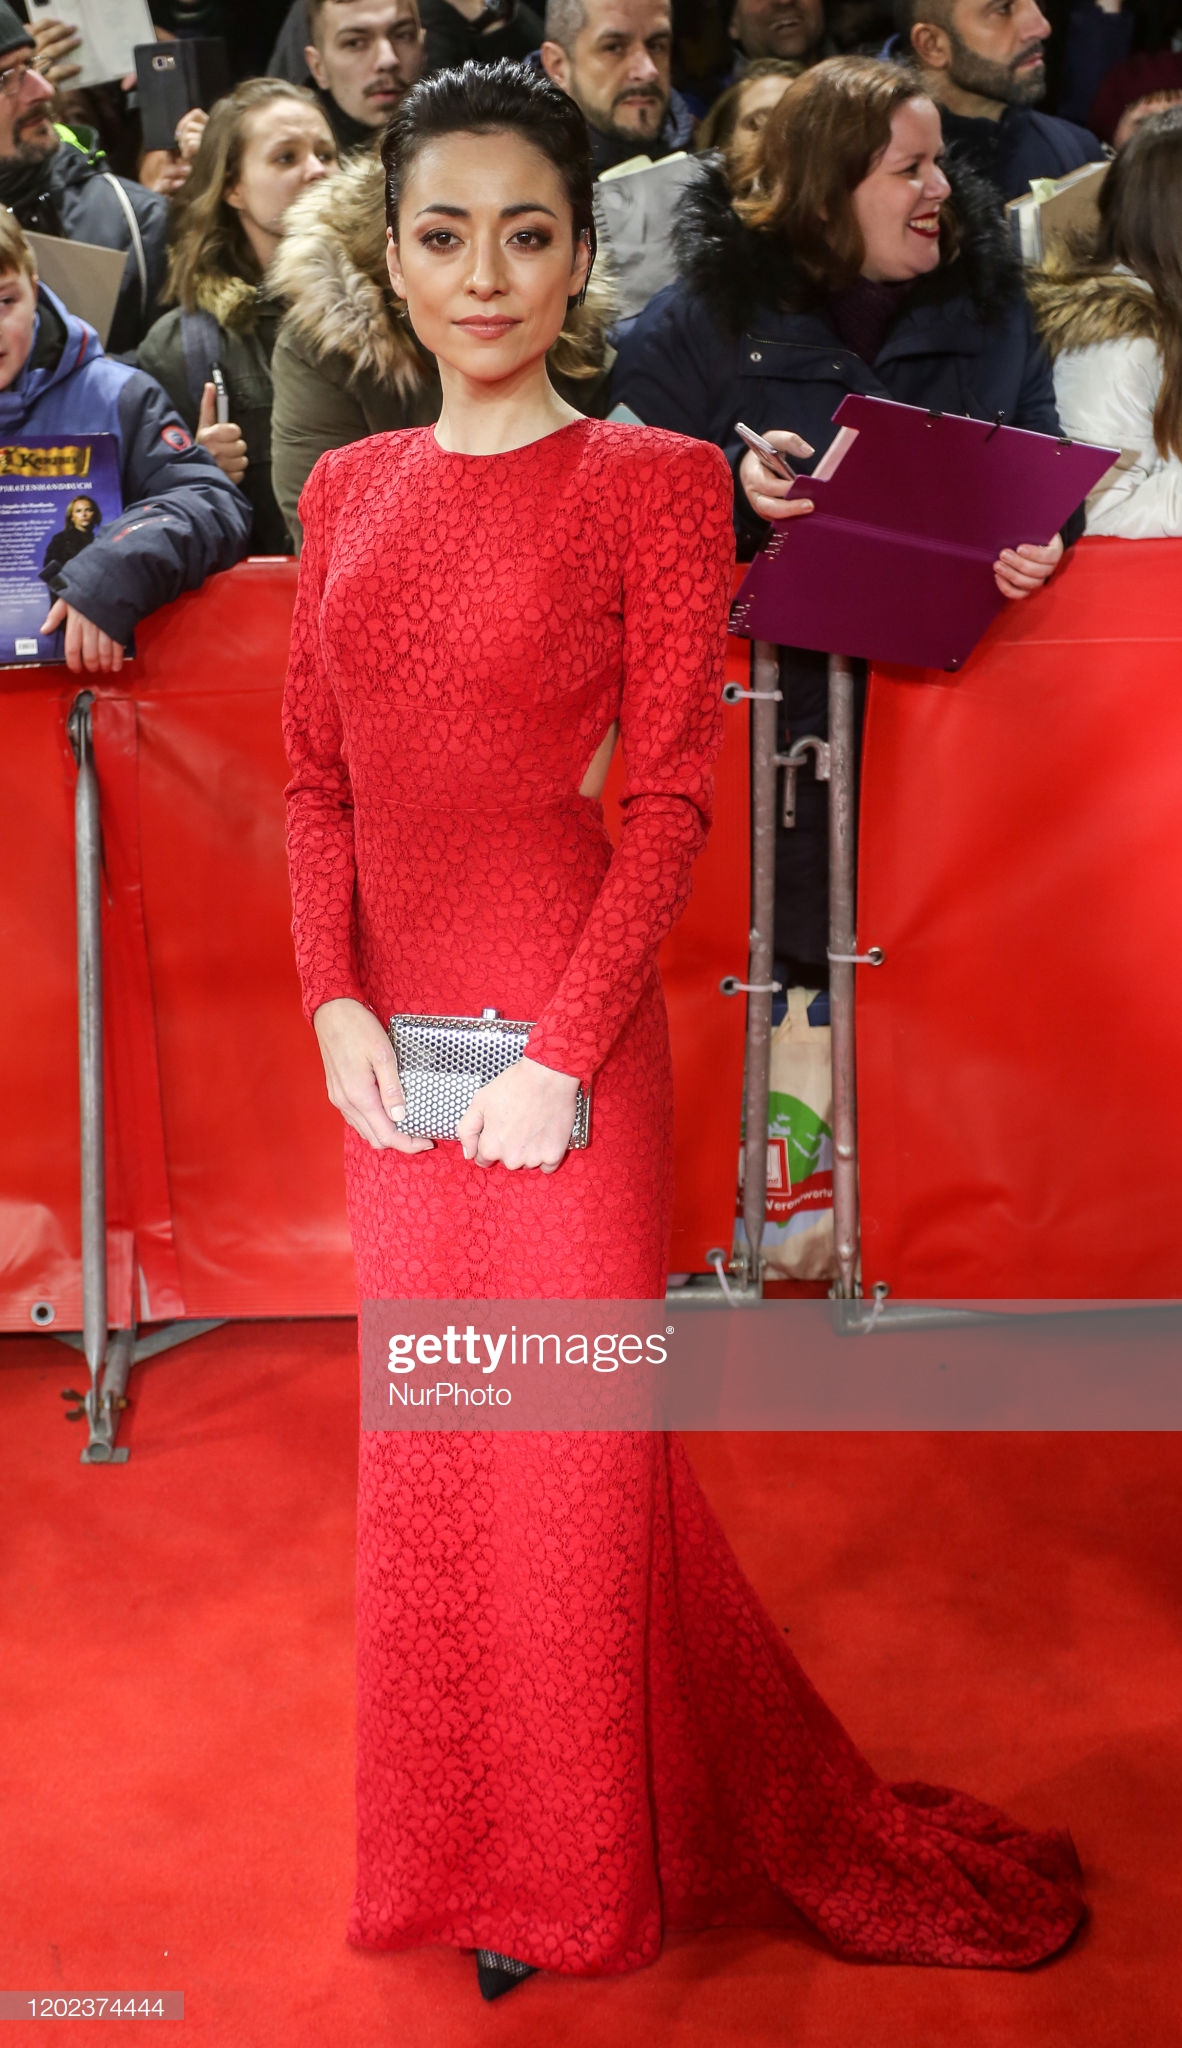 Minami arrives on a red carper before the screening of Minamata mocie during 70th Berlinale International Film Festival in Friedrichstadt-Palast in Berlin, Germany on February 21, 2020. (Photo by Dominika Zarzycka/NurPhoto via Getty Images)